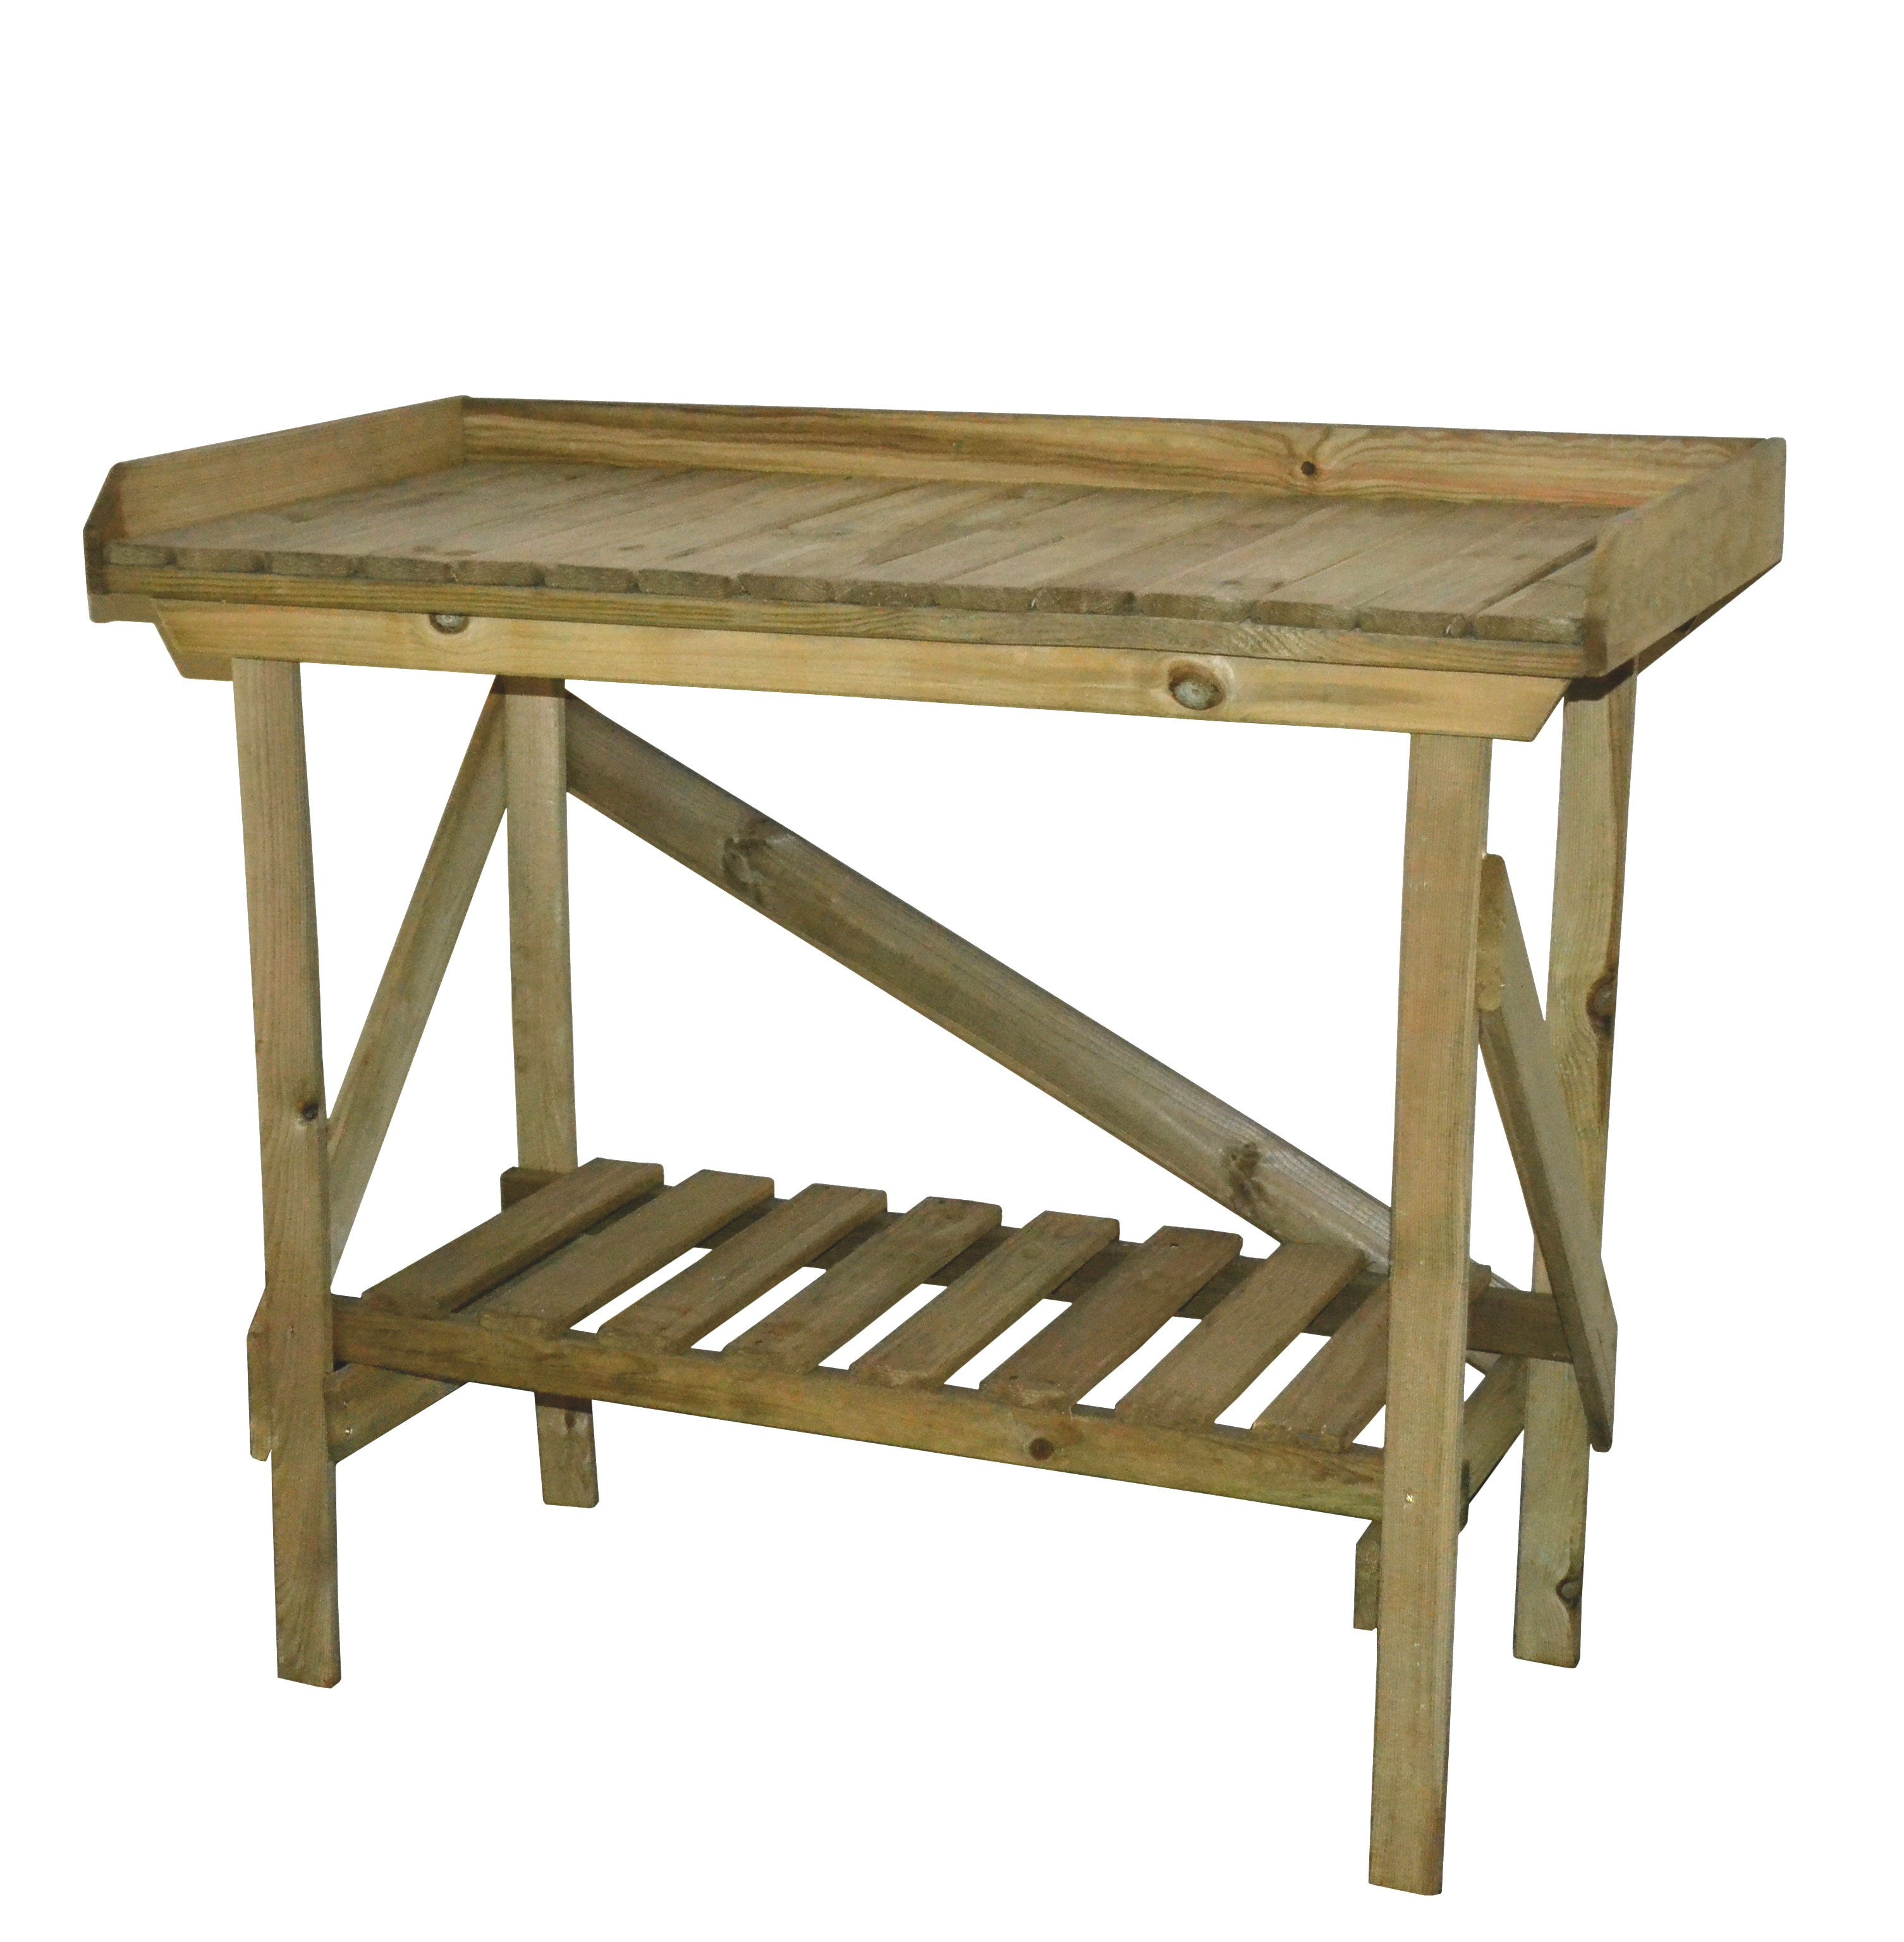 Potting bench by Outdoor living